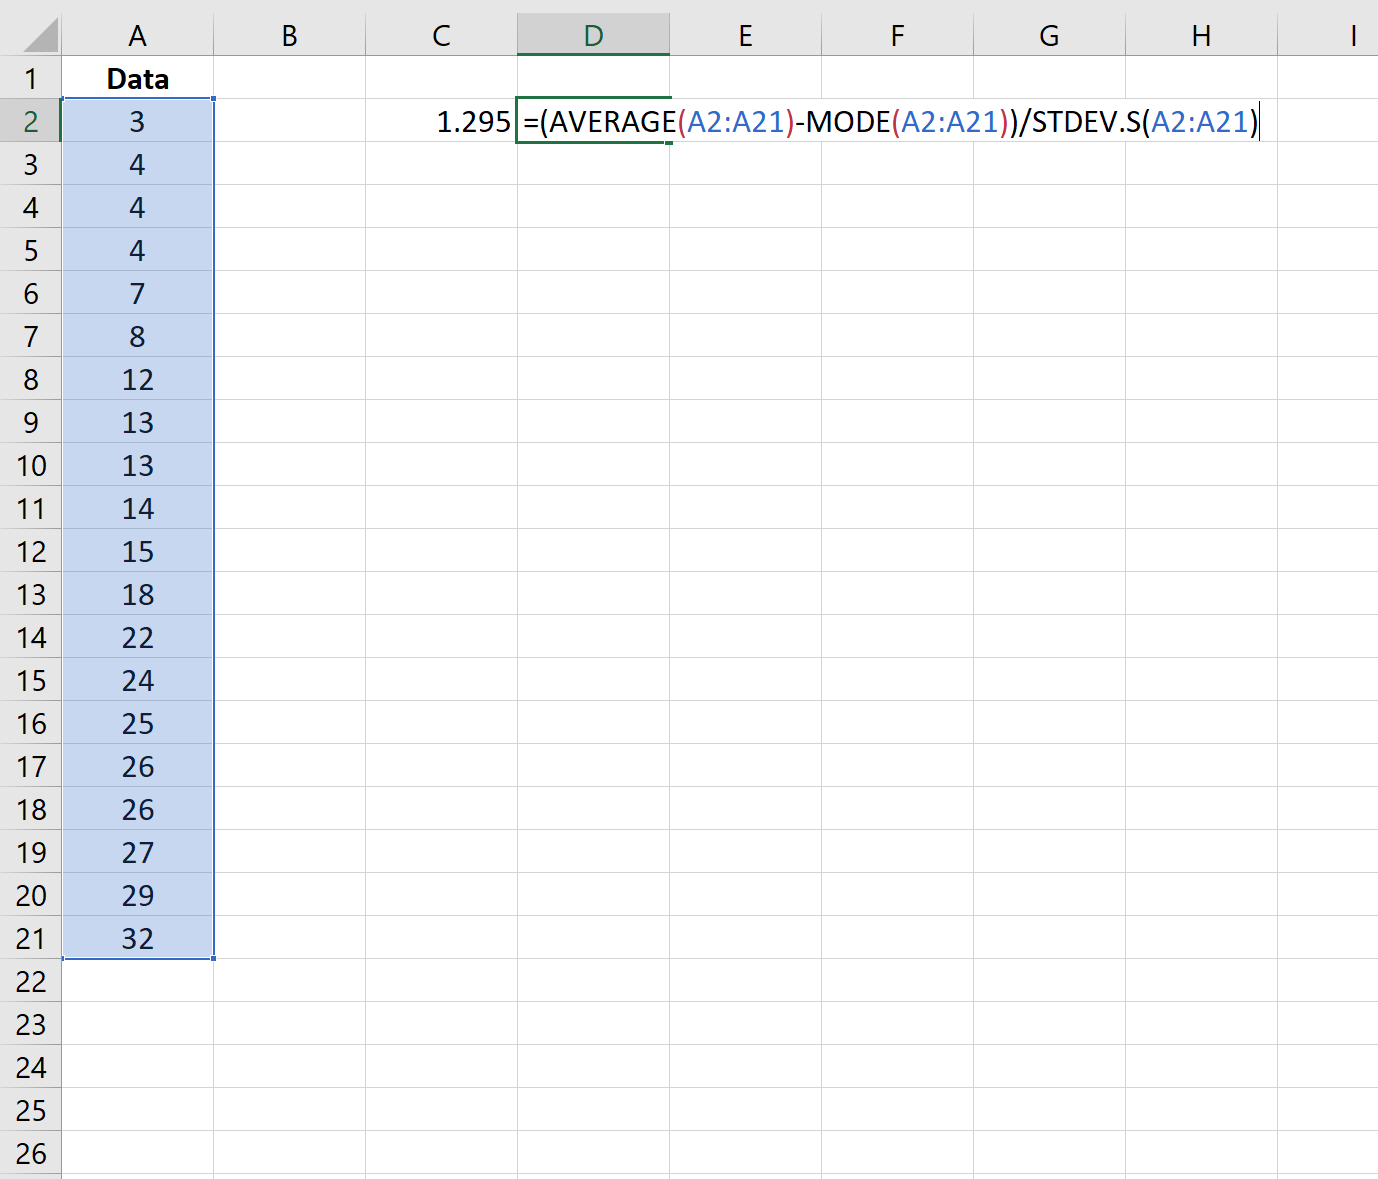 Pearson's coefficient of skewness in Excel